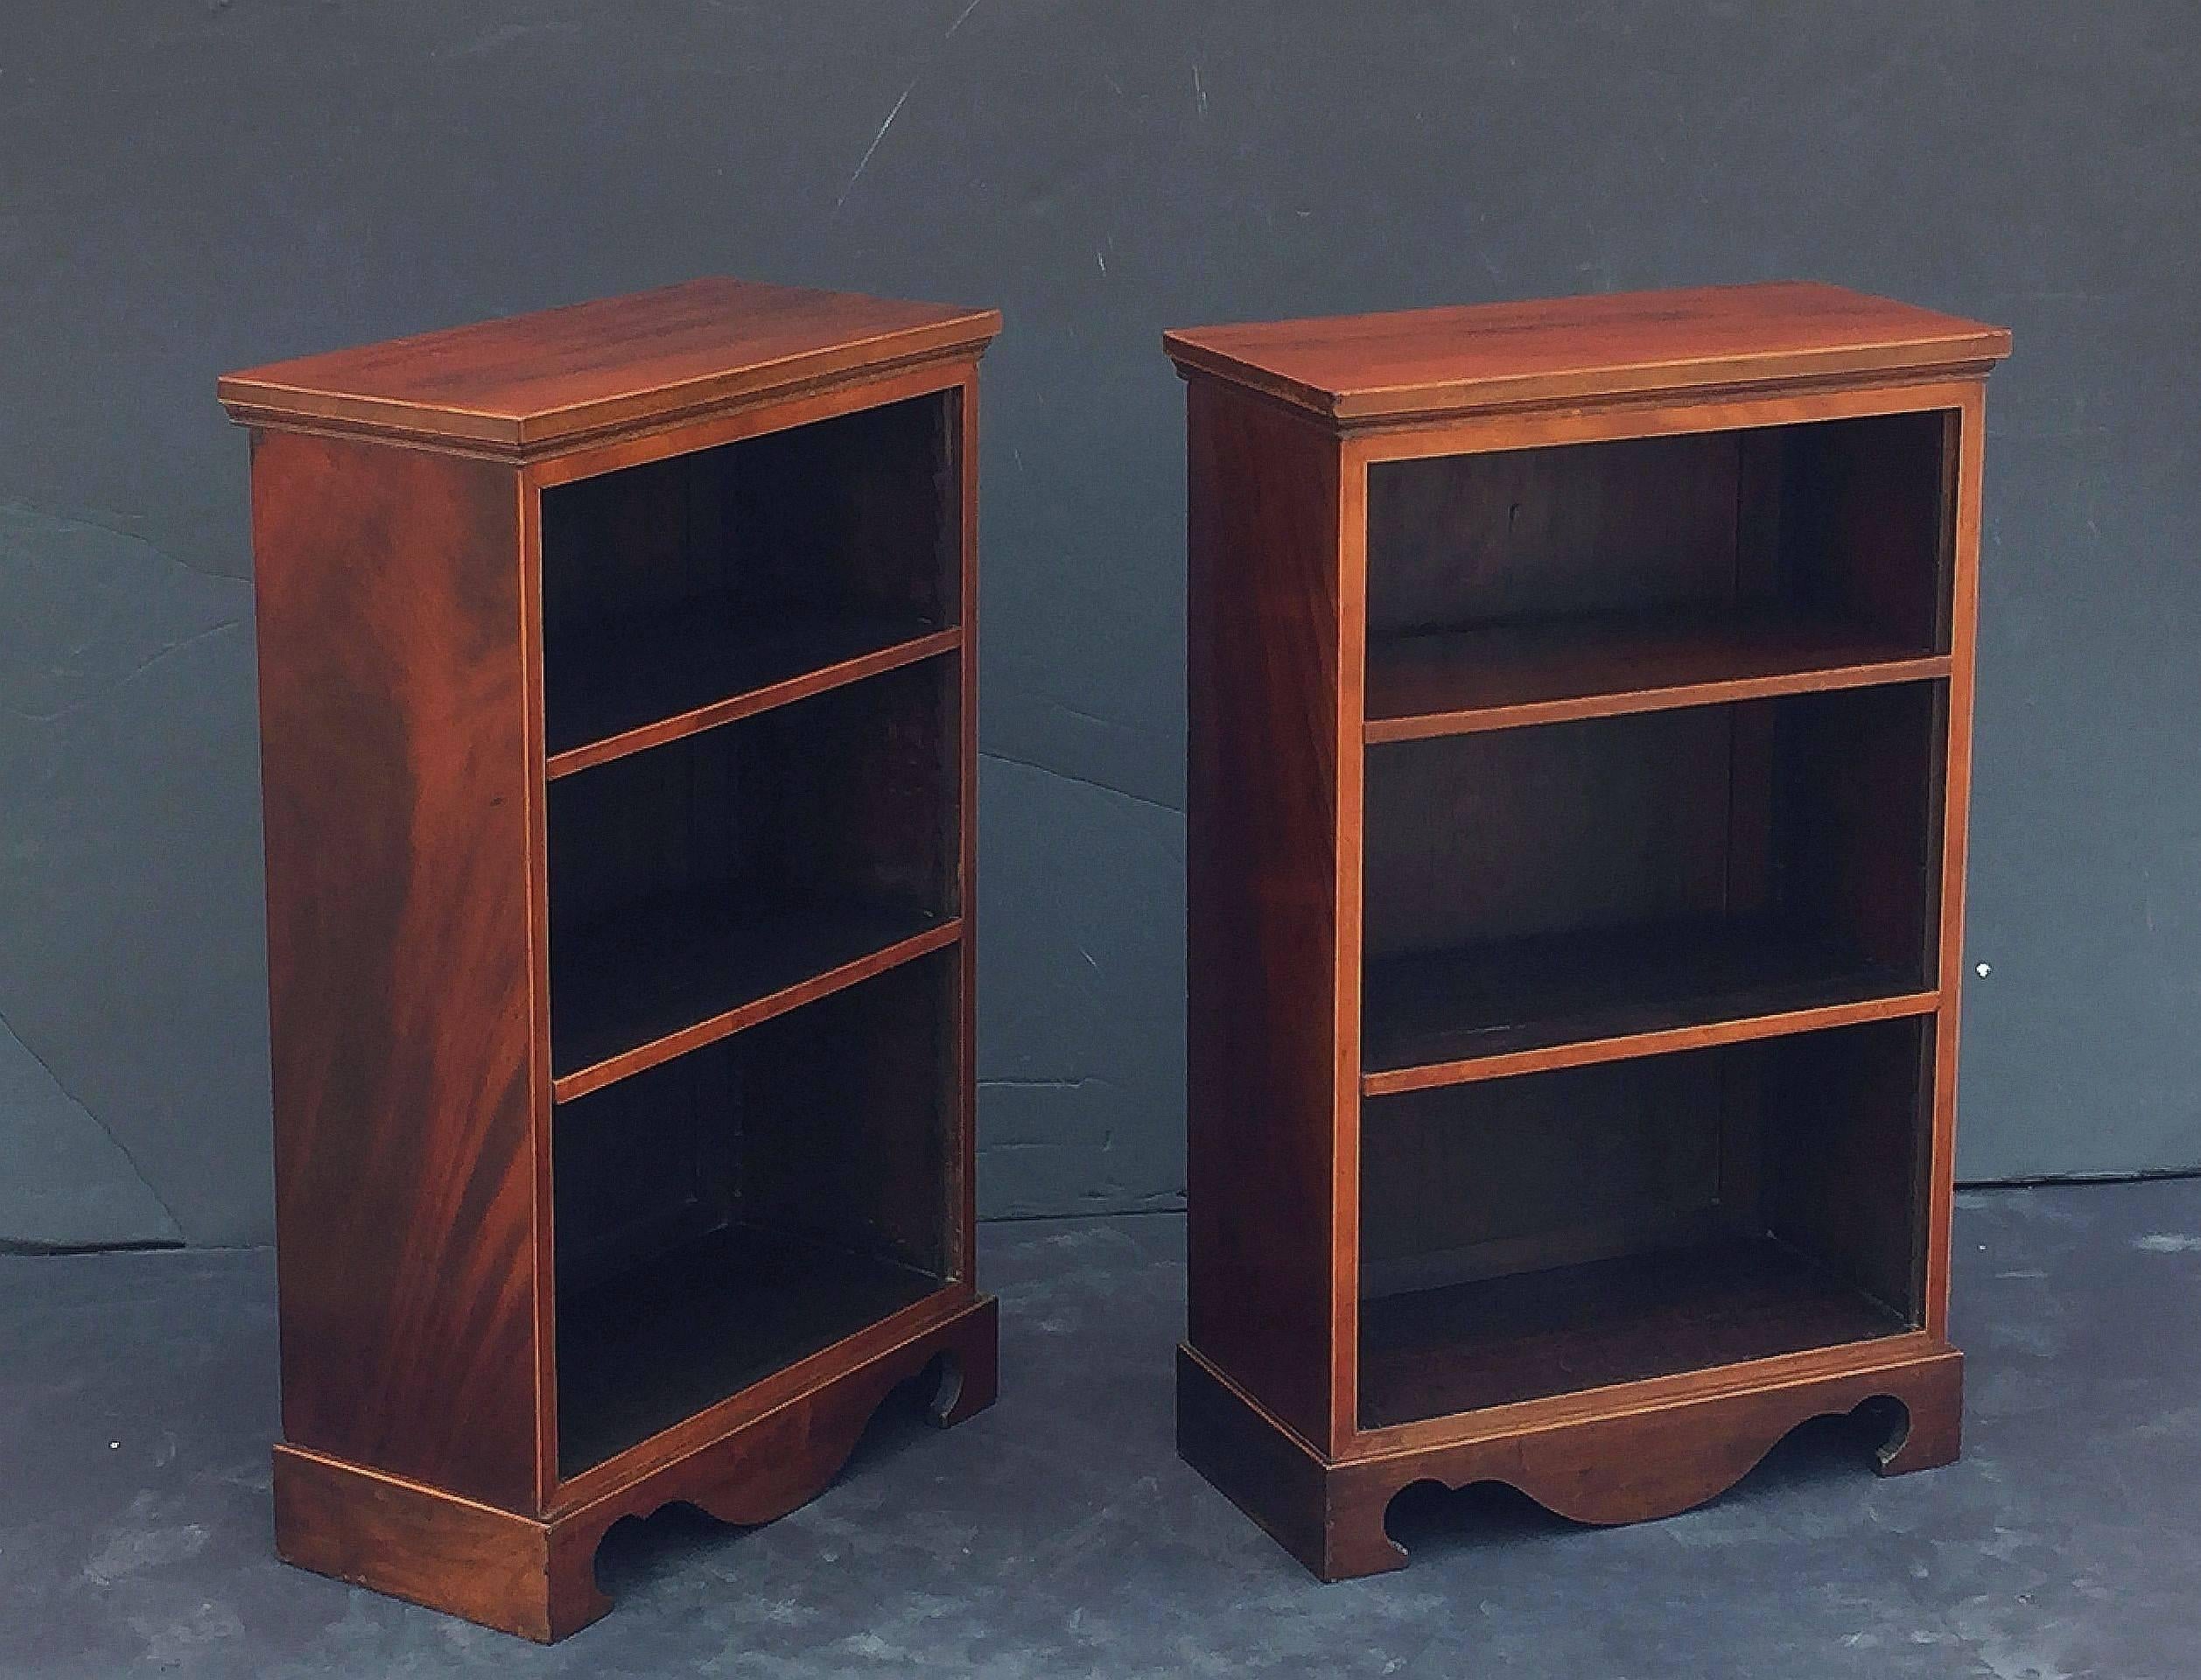 A fine pair of Scottish open bookcases of mahogany, each bookcase featuring moulded tops of mahogany with accents of strung inlay, two adjustable shelves and raised plinth bases with serpentine apron.

Each bookcase measures H 37 in. x W 23 in. x